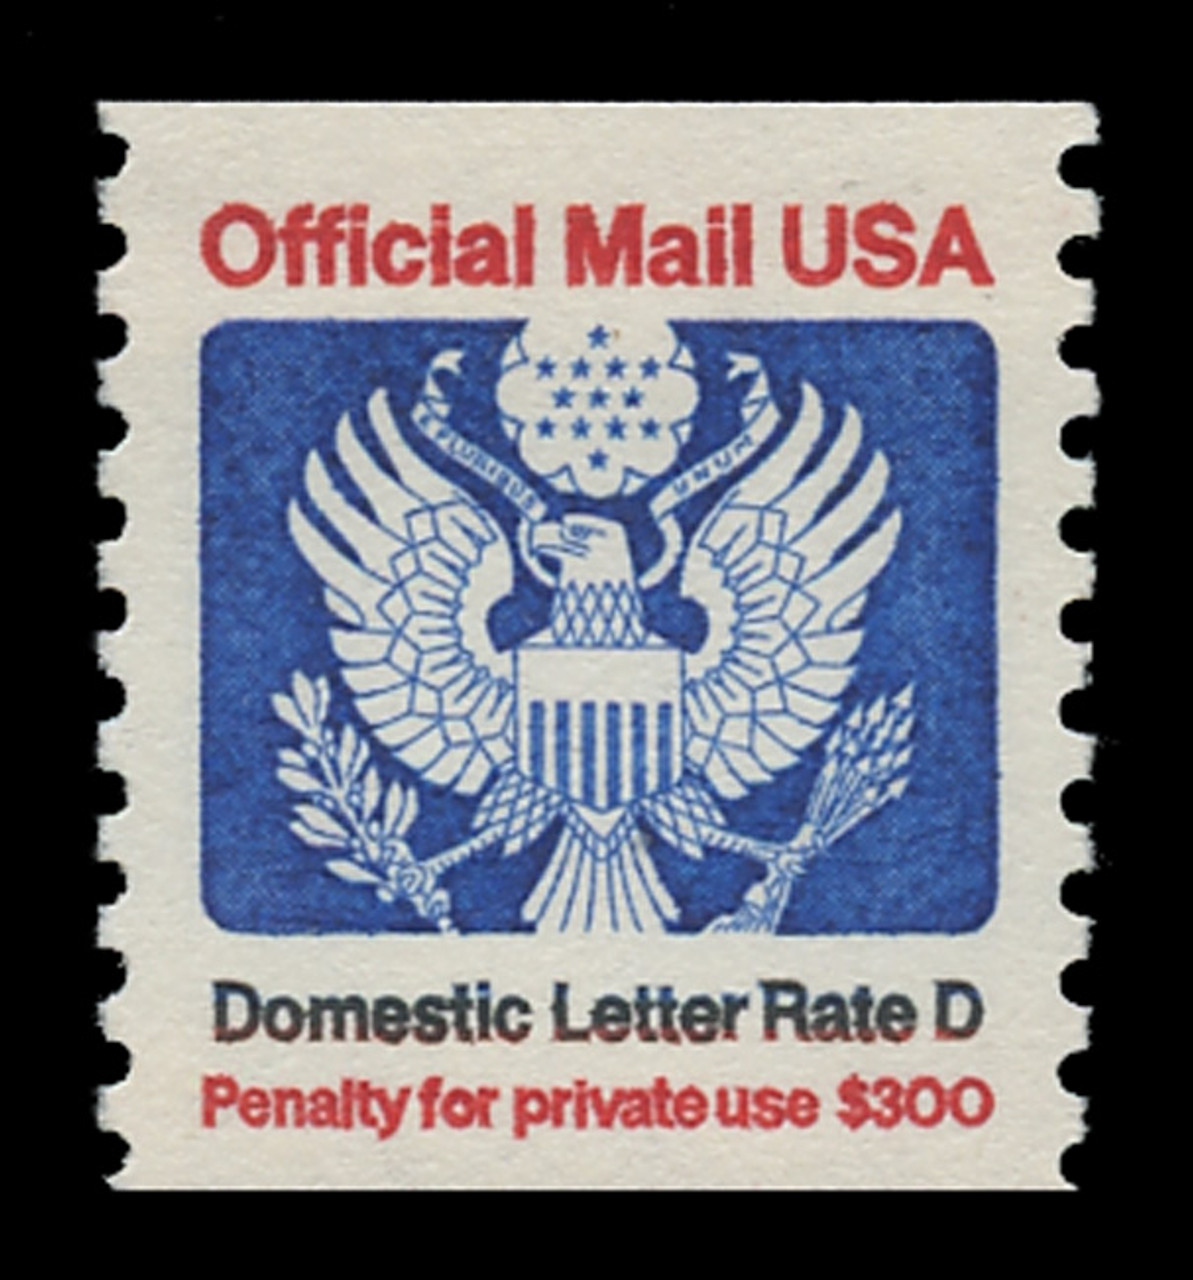 USA Scott # O 139, 1985 (22c) "Domestic Letter Rate D" Official Mail Eagle Coil